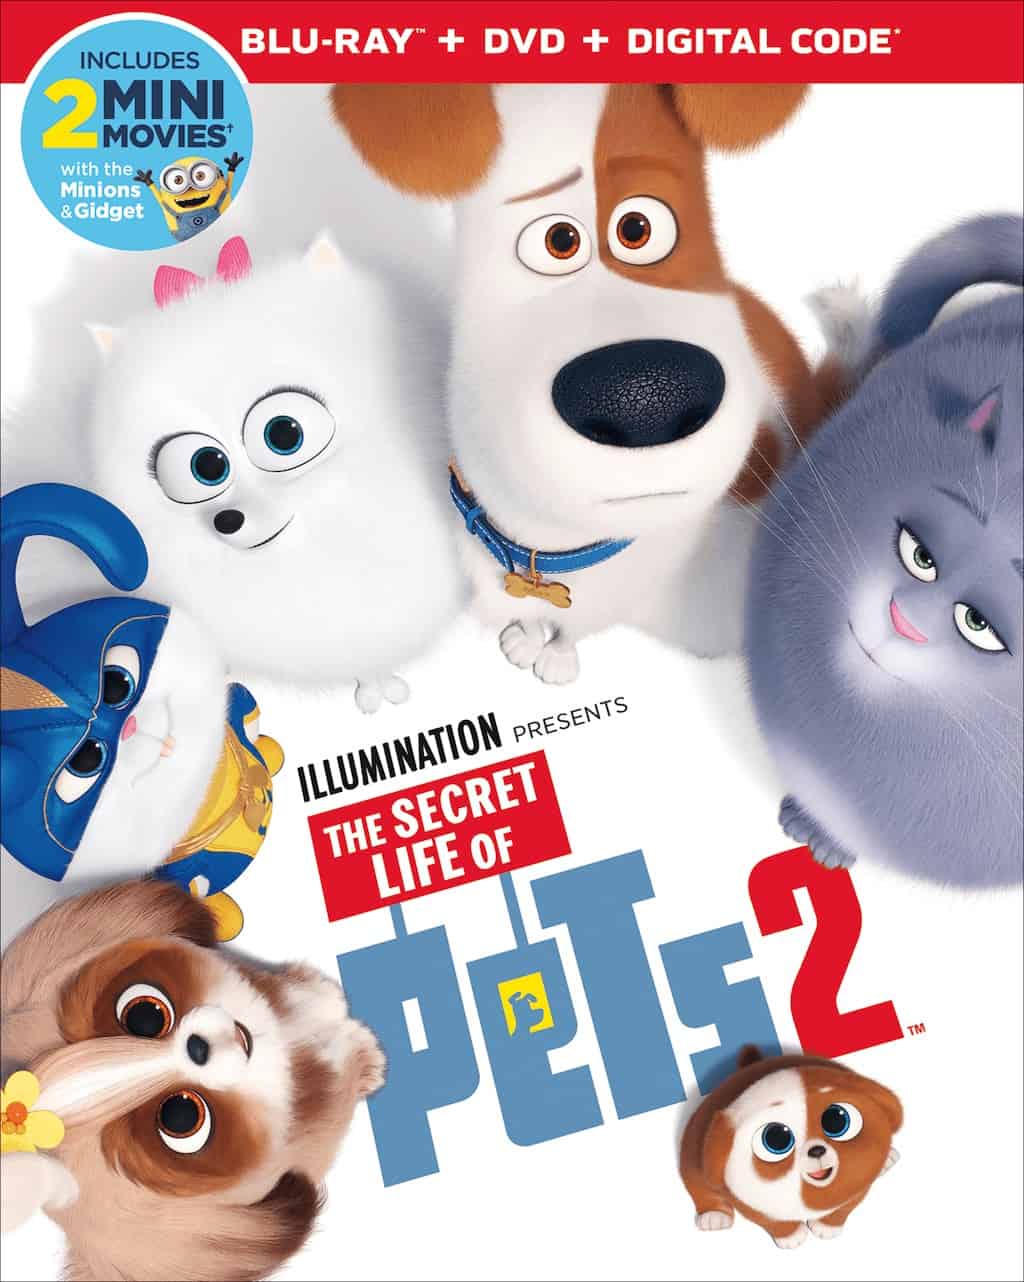 Max entrusts Gidget with his toy, Busy Bee, but ends up losing it. Snowball and Daisy try to rescue a Tiger cub from the circus in Secret Life of Pets 2.